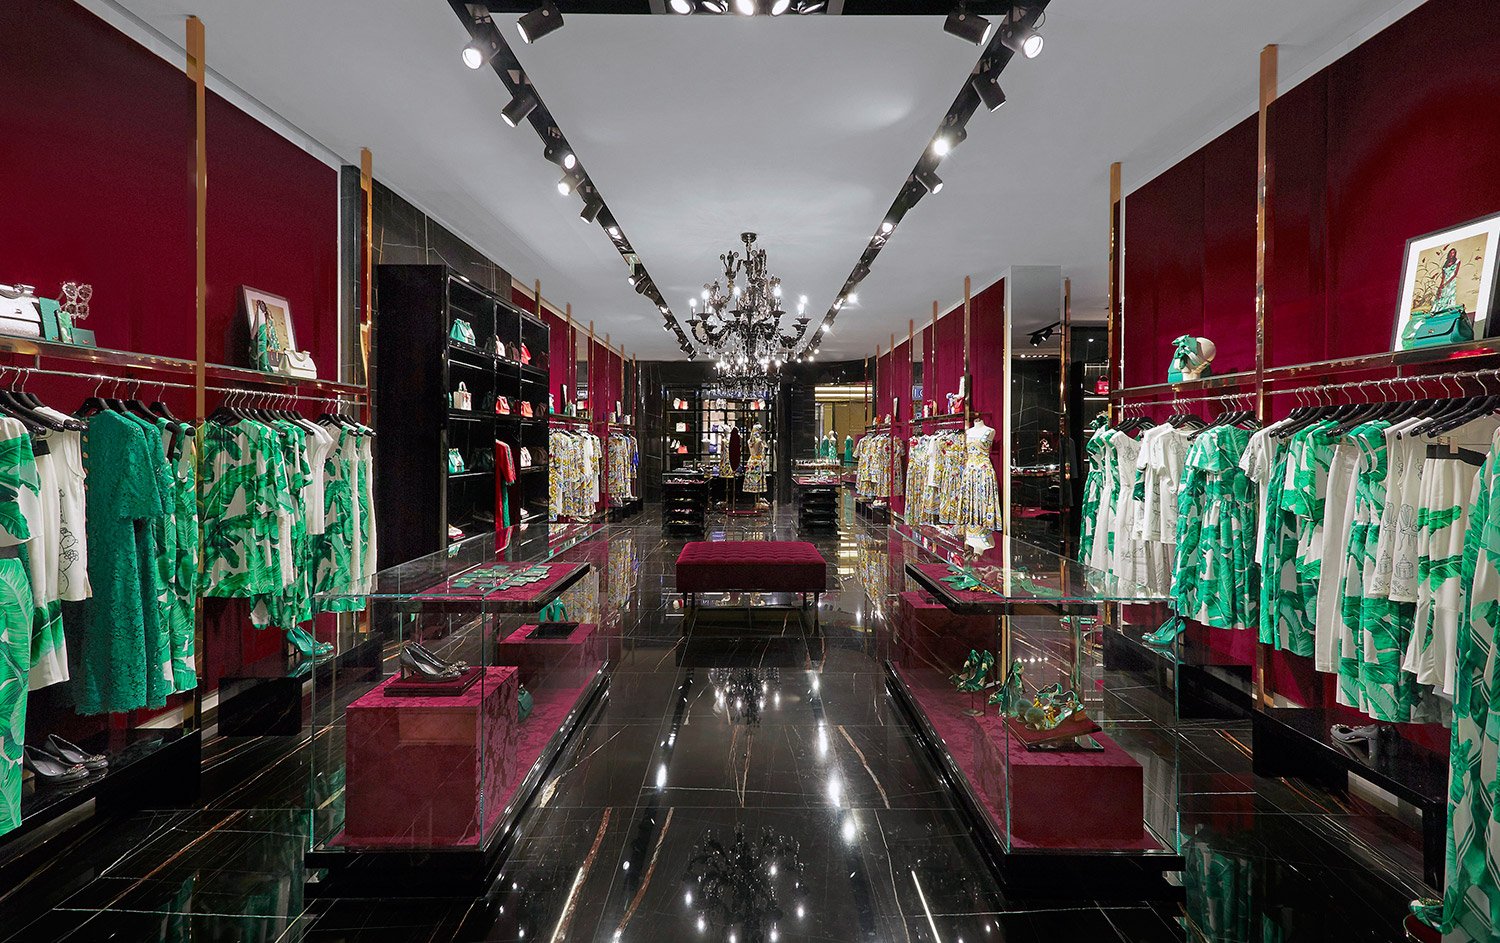 Dolce Gabbana "Mall of the Emirates in Dubai welcomes a new Dolce&amp;Gabbana boutique. https://t.co/W8CXstL928" / Twitter